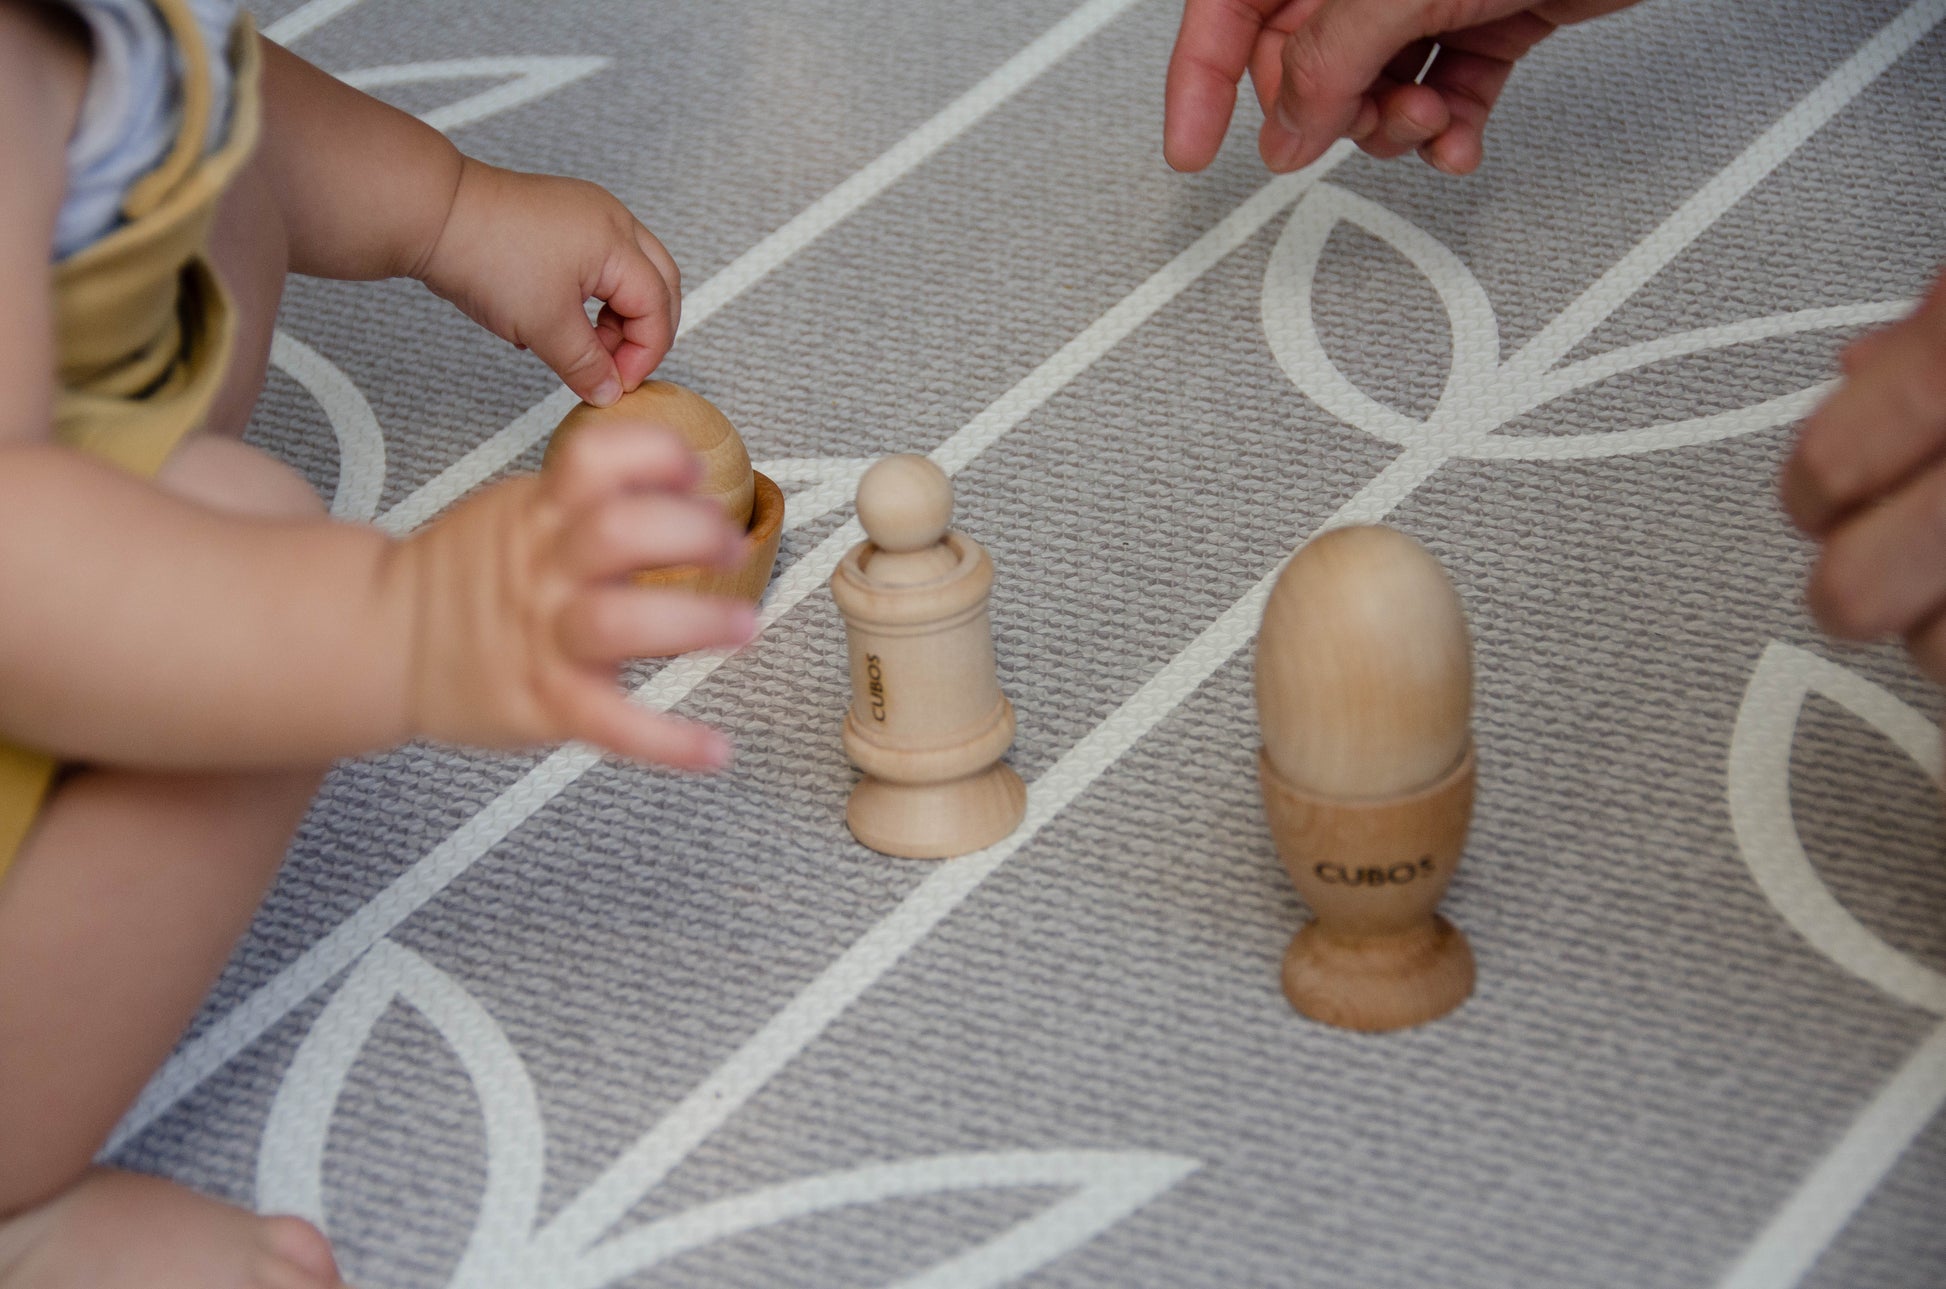 Baby engaging in playtime with the Cubos Ball Bowl, Peg & Egg Cup set, exploring and interacting with the different elements for fun and learning.